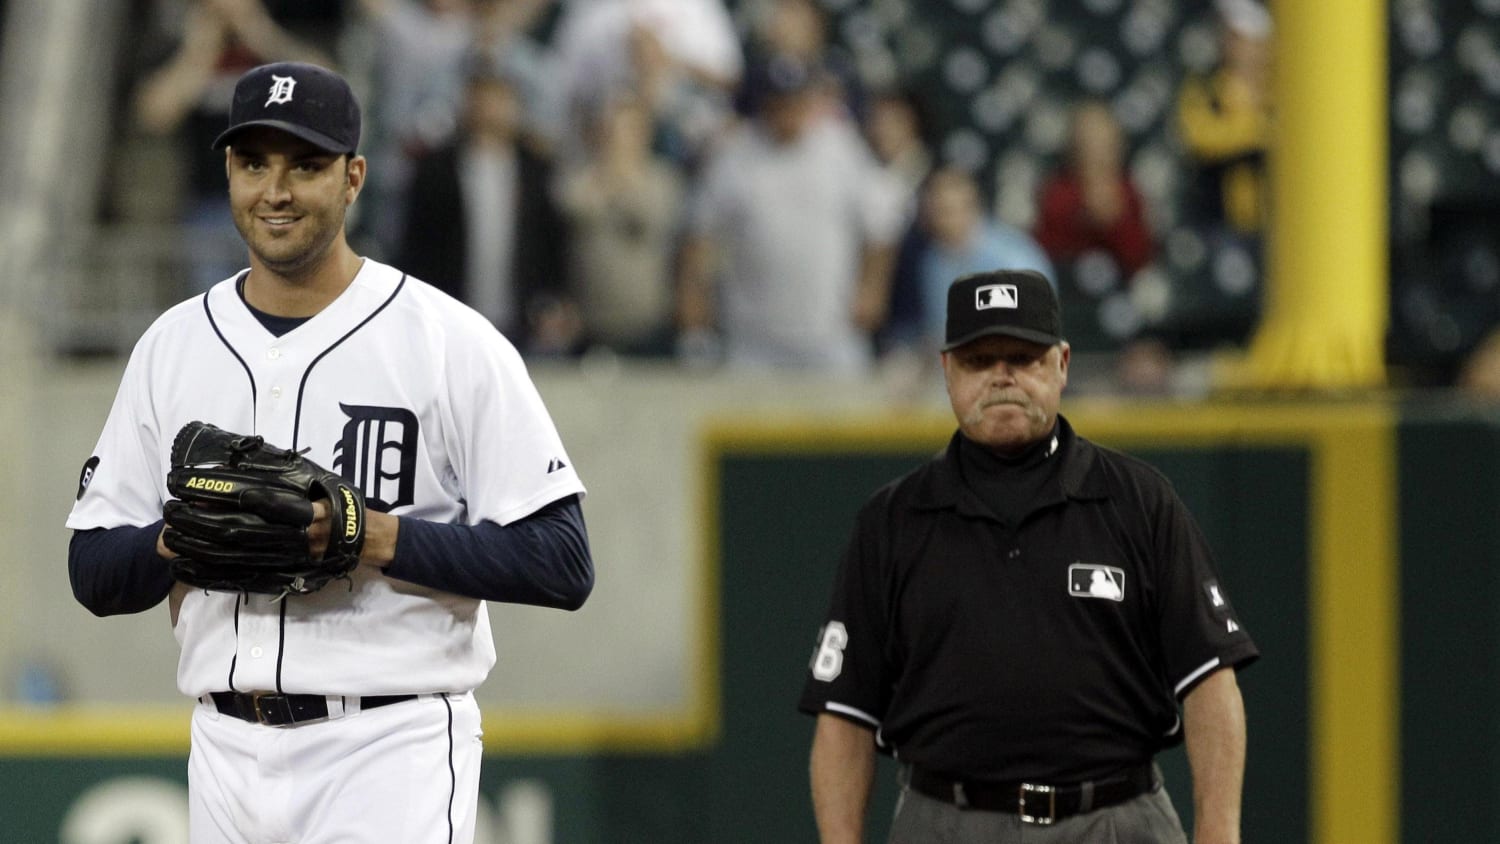 Armando Galarraga's 'perfect game' and the redemption that followed 10 years later